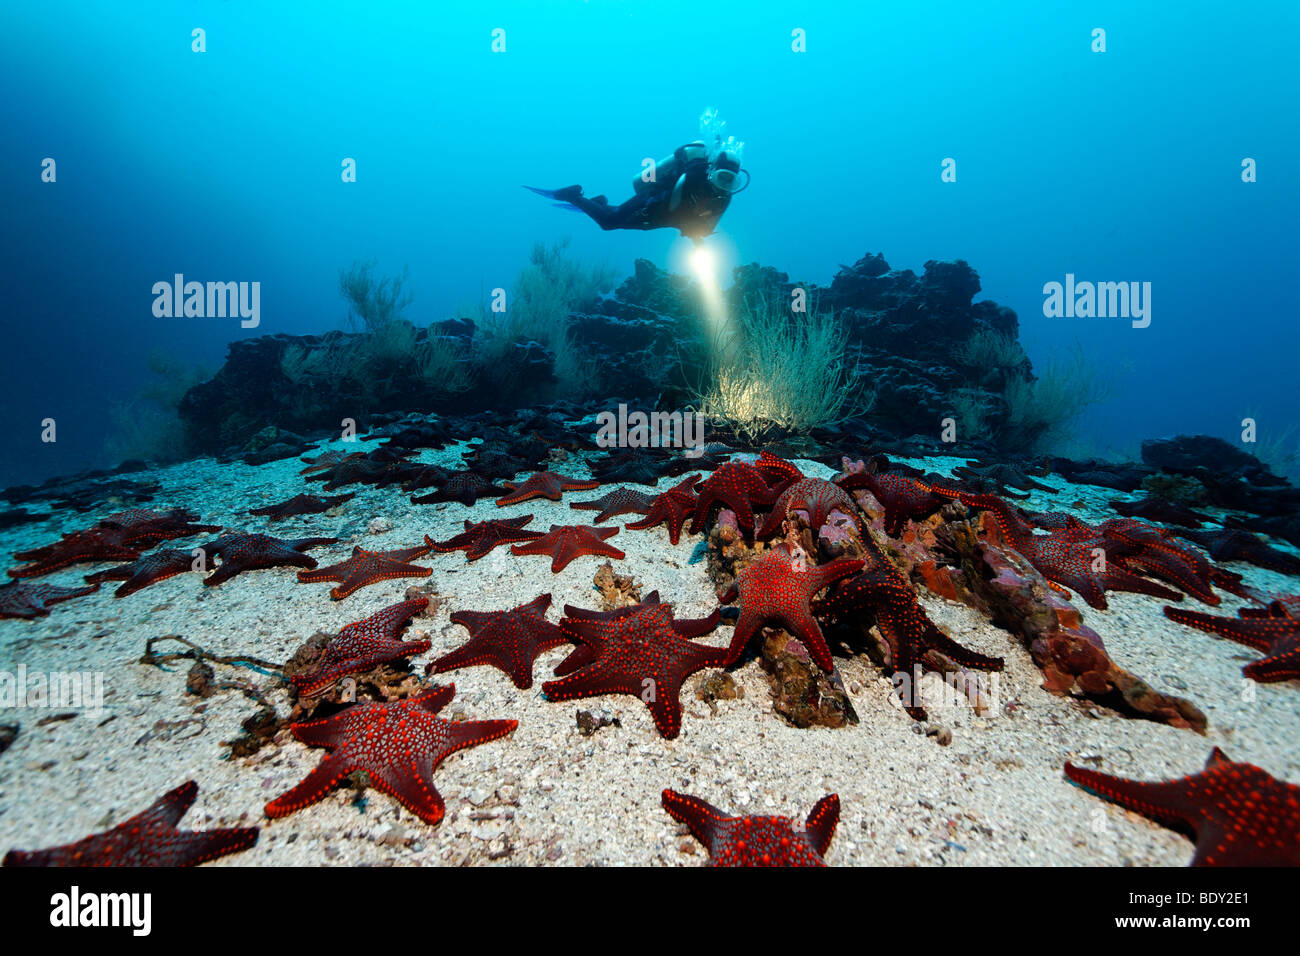 Gathering of Knobby Star Starfish (Pentaceraster cumingi) on sandy ground in front of a reef with a diver, Cousin Rock, UNESCO  Stock Photo